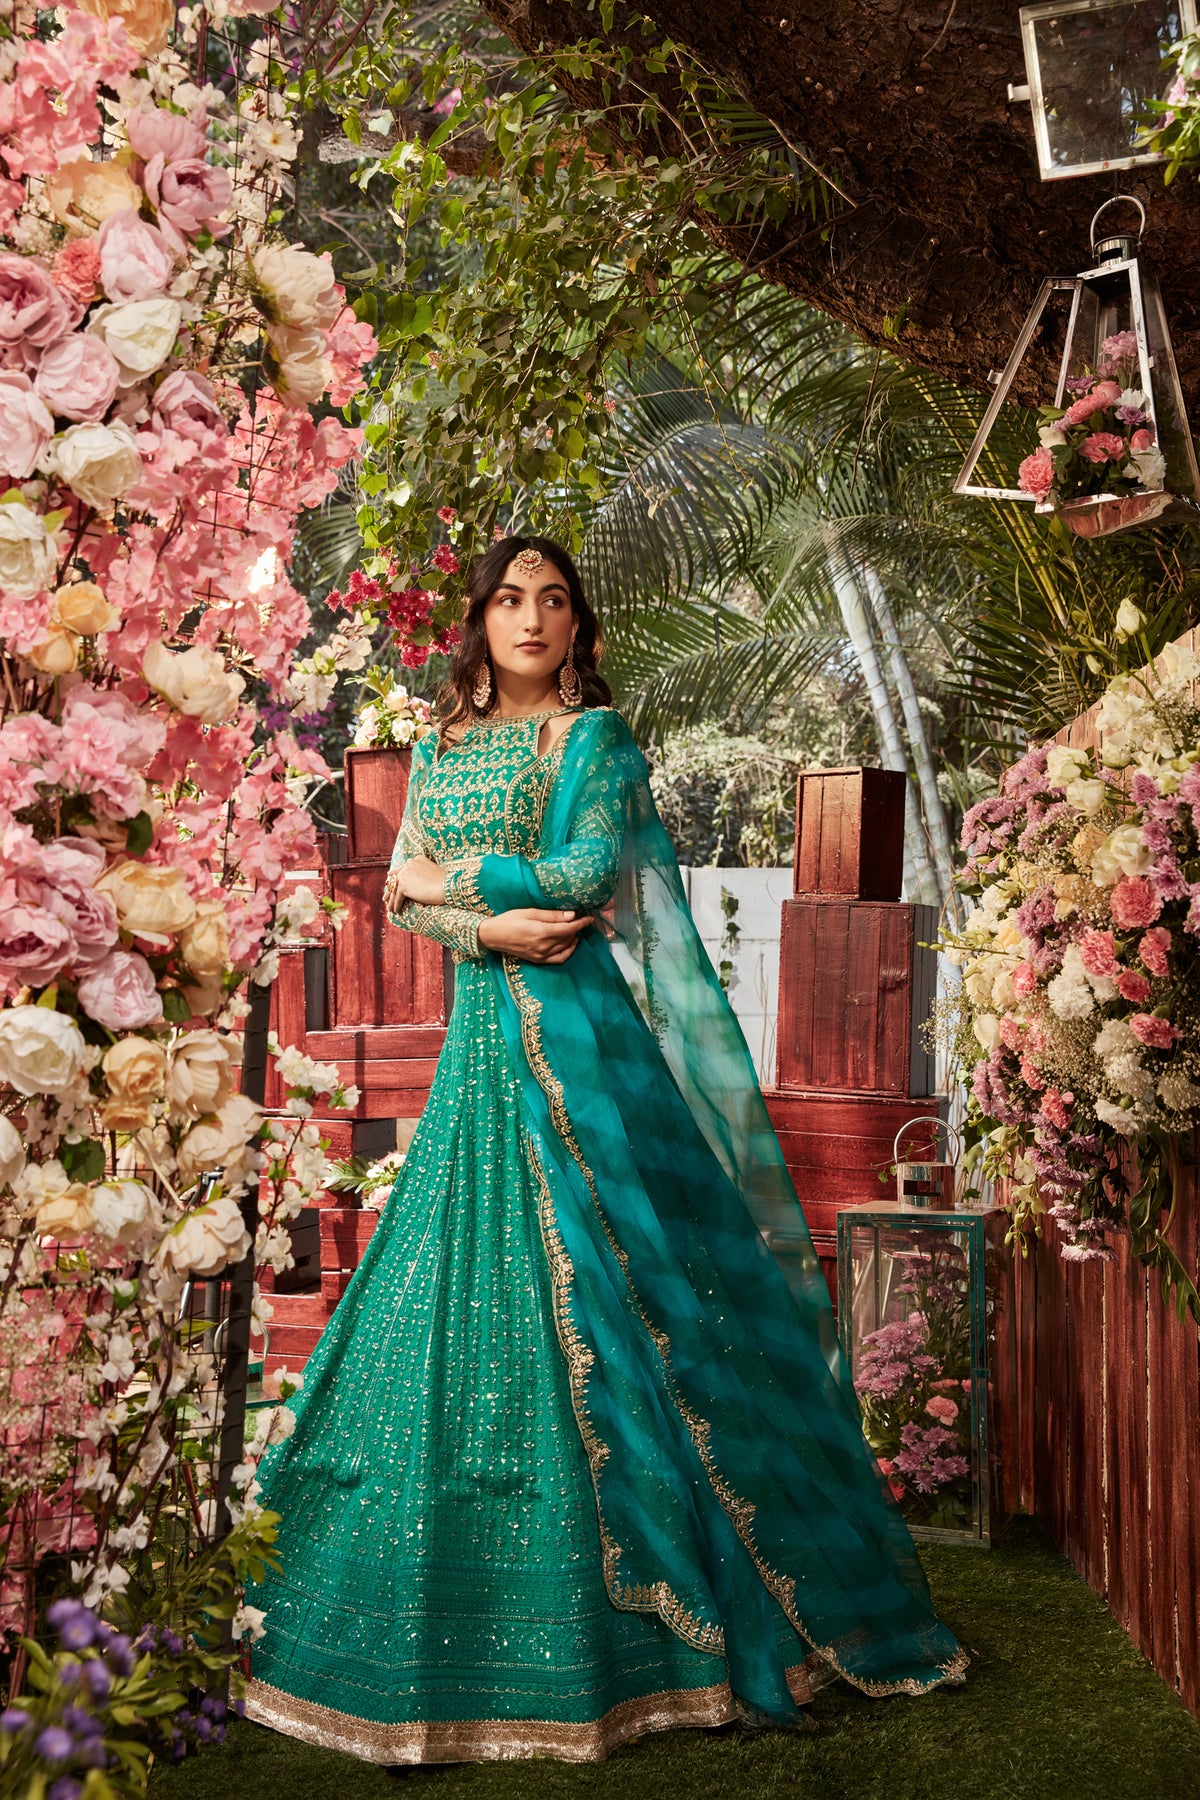 Parakeet green chikankari lehenga with embroidered blouse with an organza embroidered dupatta